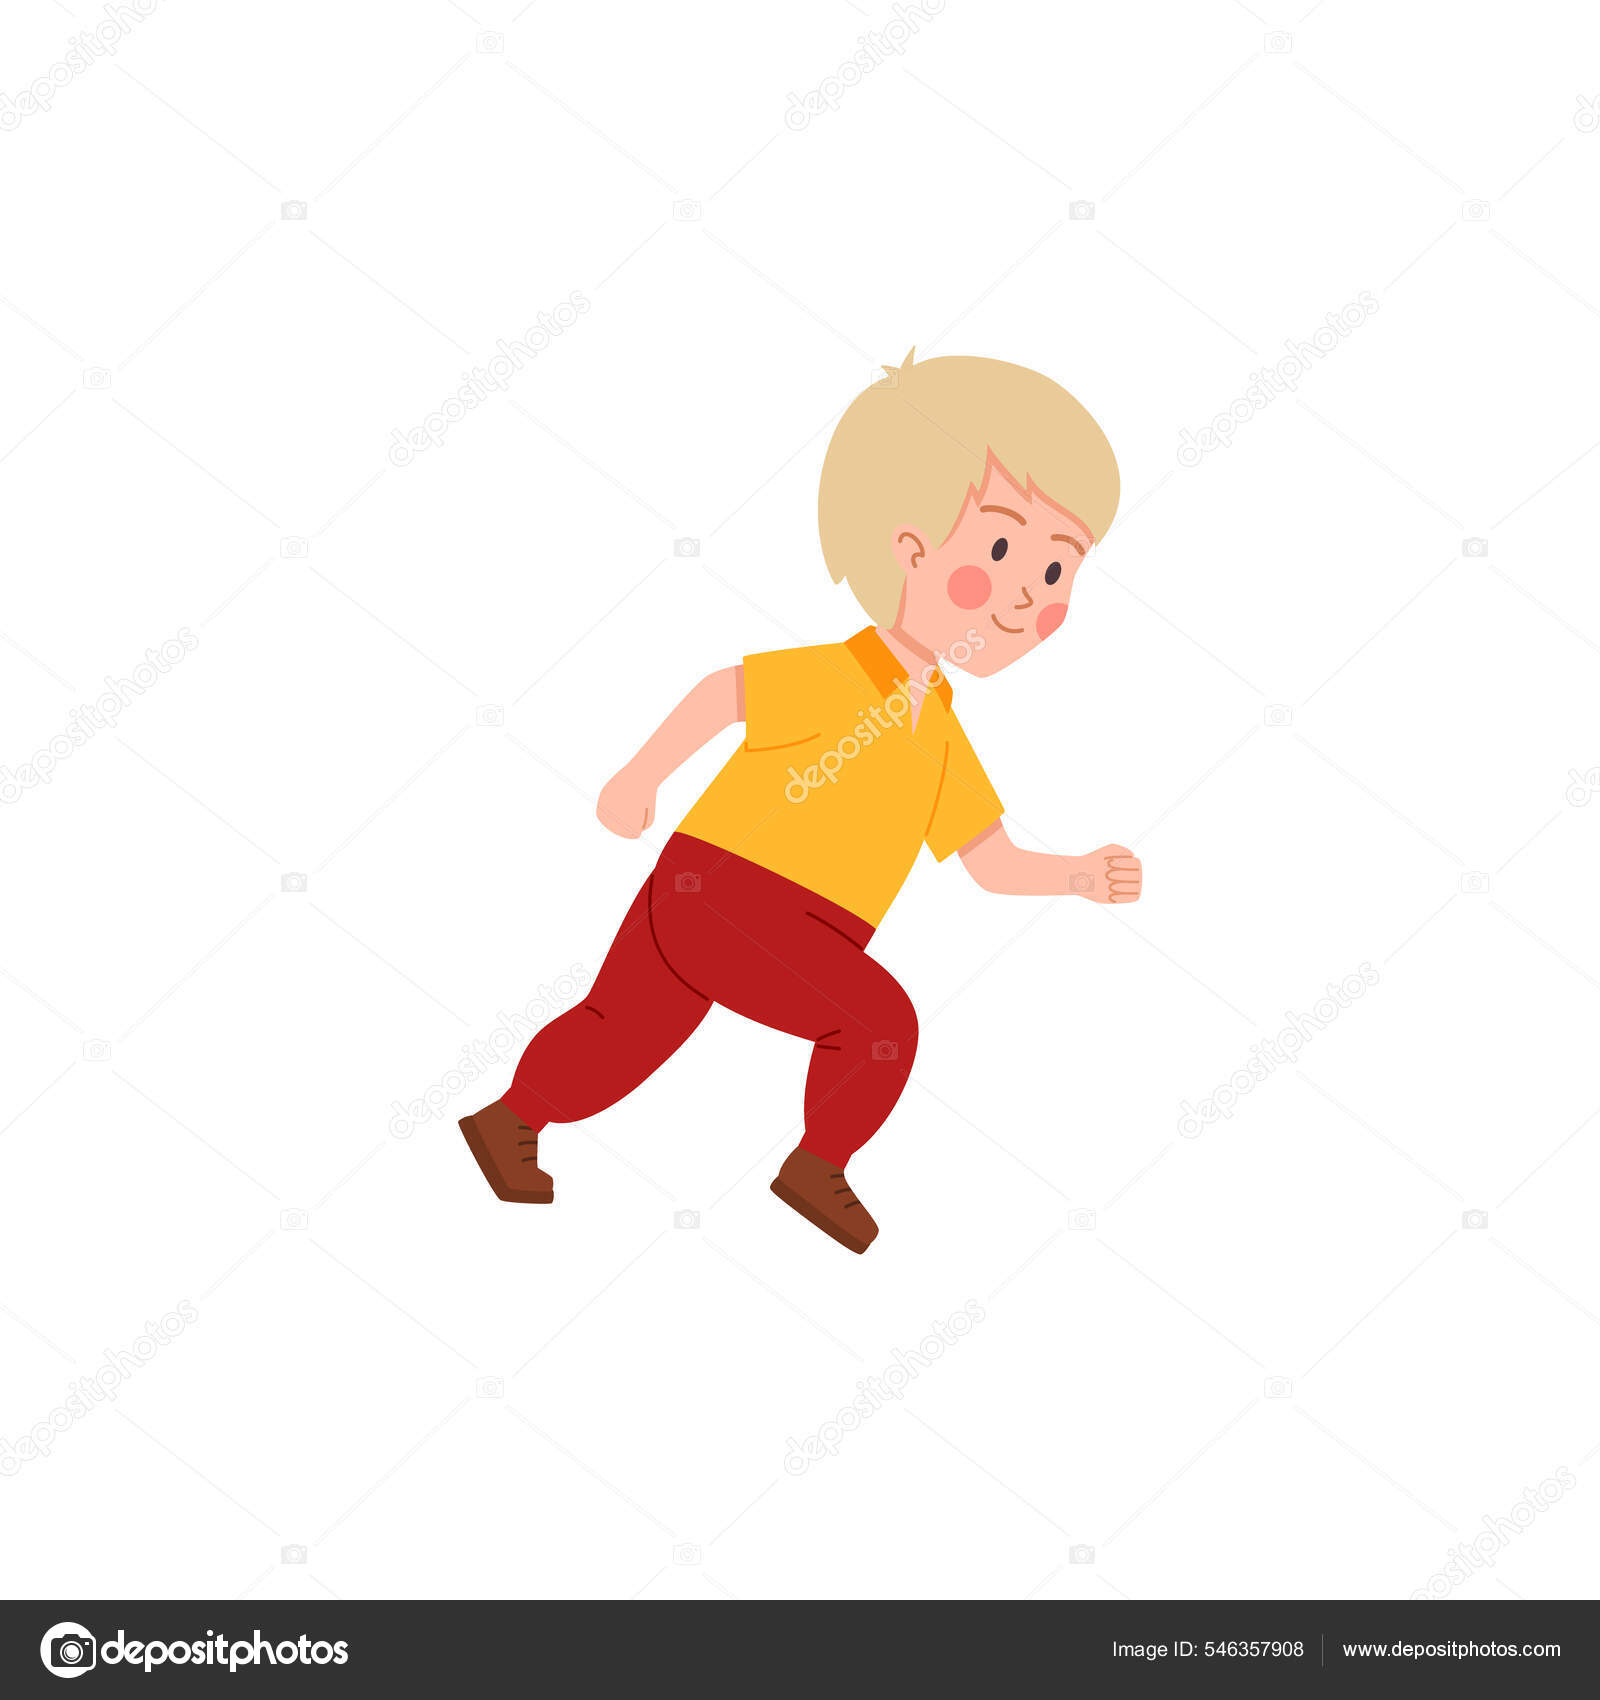 Cartoon children exercising and do sport with - Stock